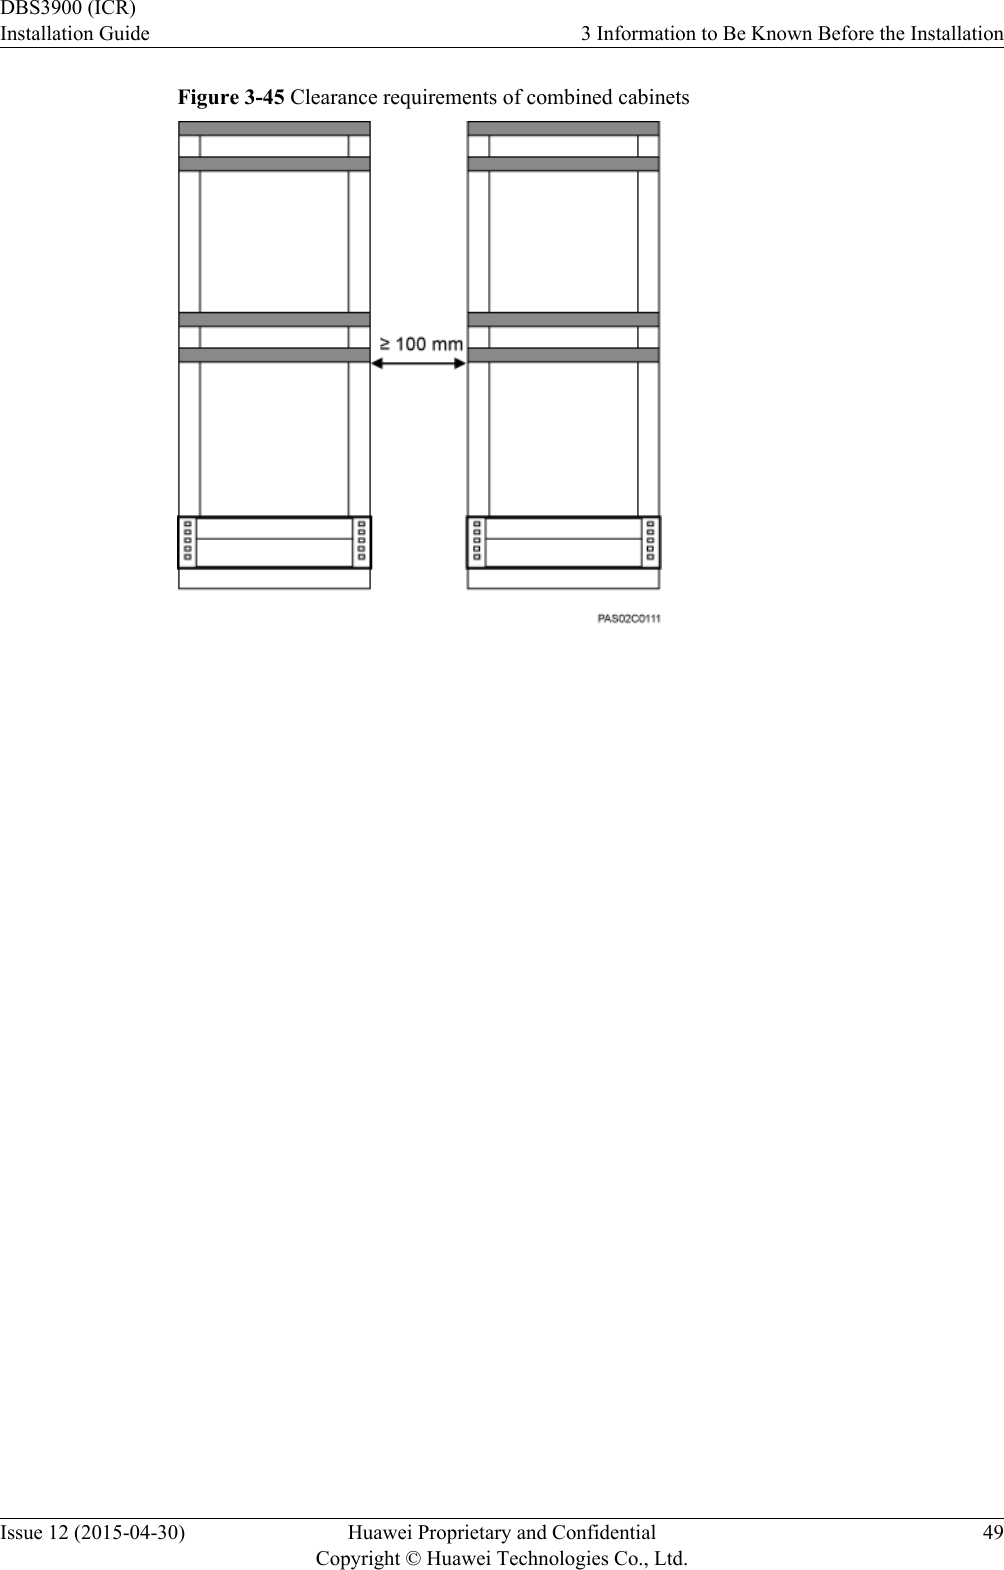 Figure 3-45 Clearance requirements of combined cabinetsDBS3900 (ICR)Installation Guide 3 Information to Be Known Before the InstallationIssue 12 (2015-04-30) Huawei Proprietary and ConfidentialCopyright © Huawei Technologies Co., Ltd.49